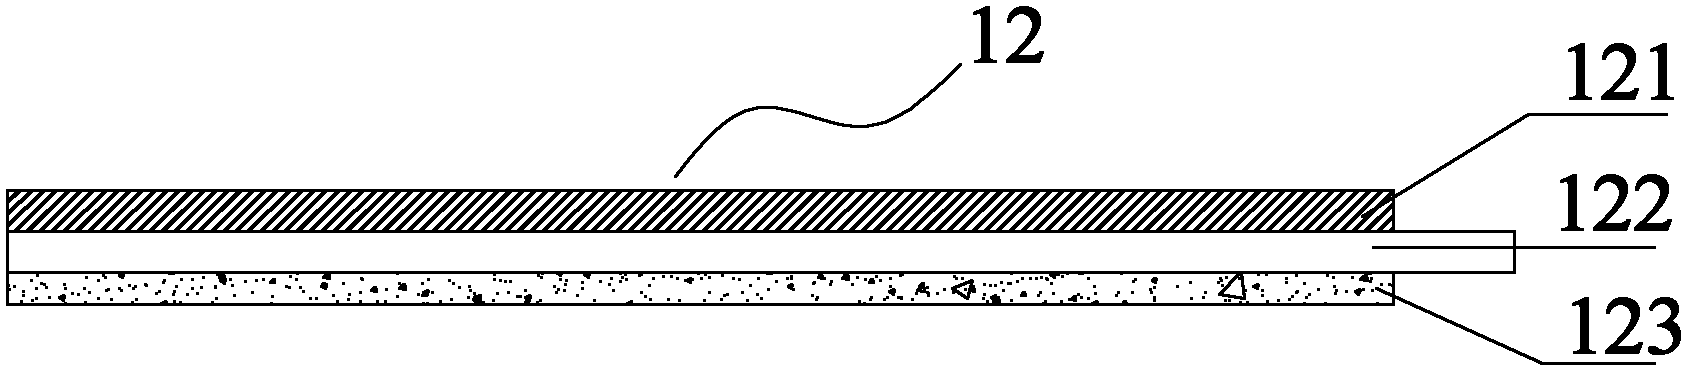 Lithium ion energy storage device and its preparation method